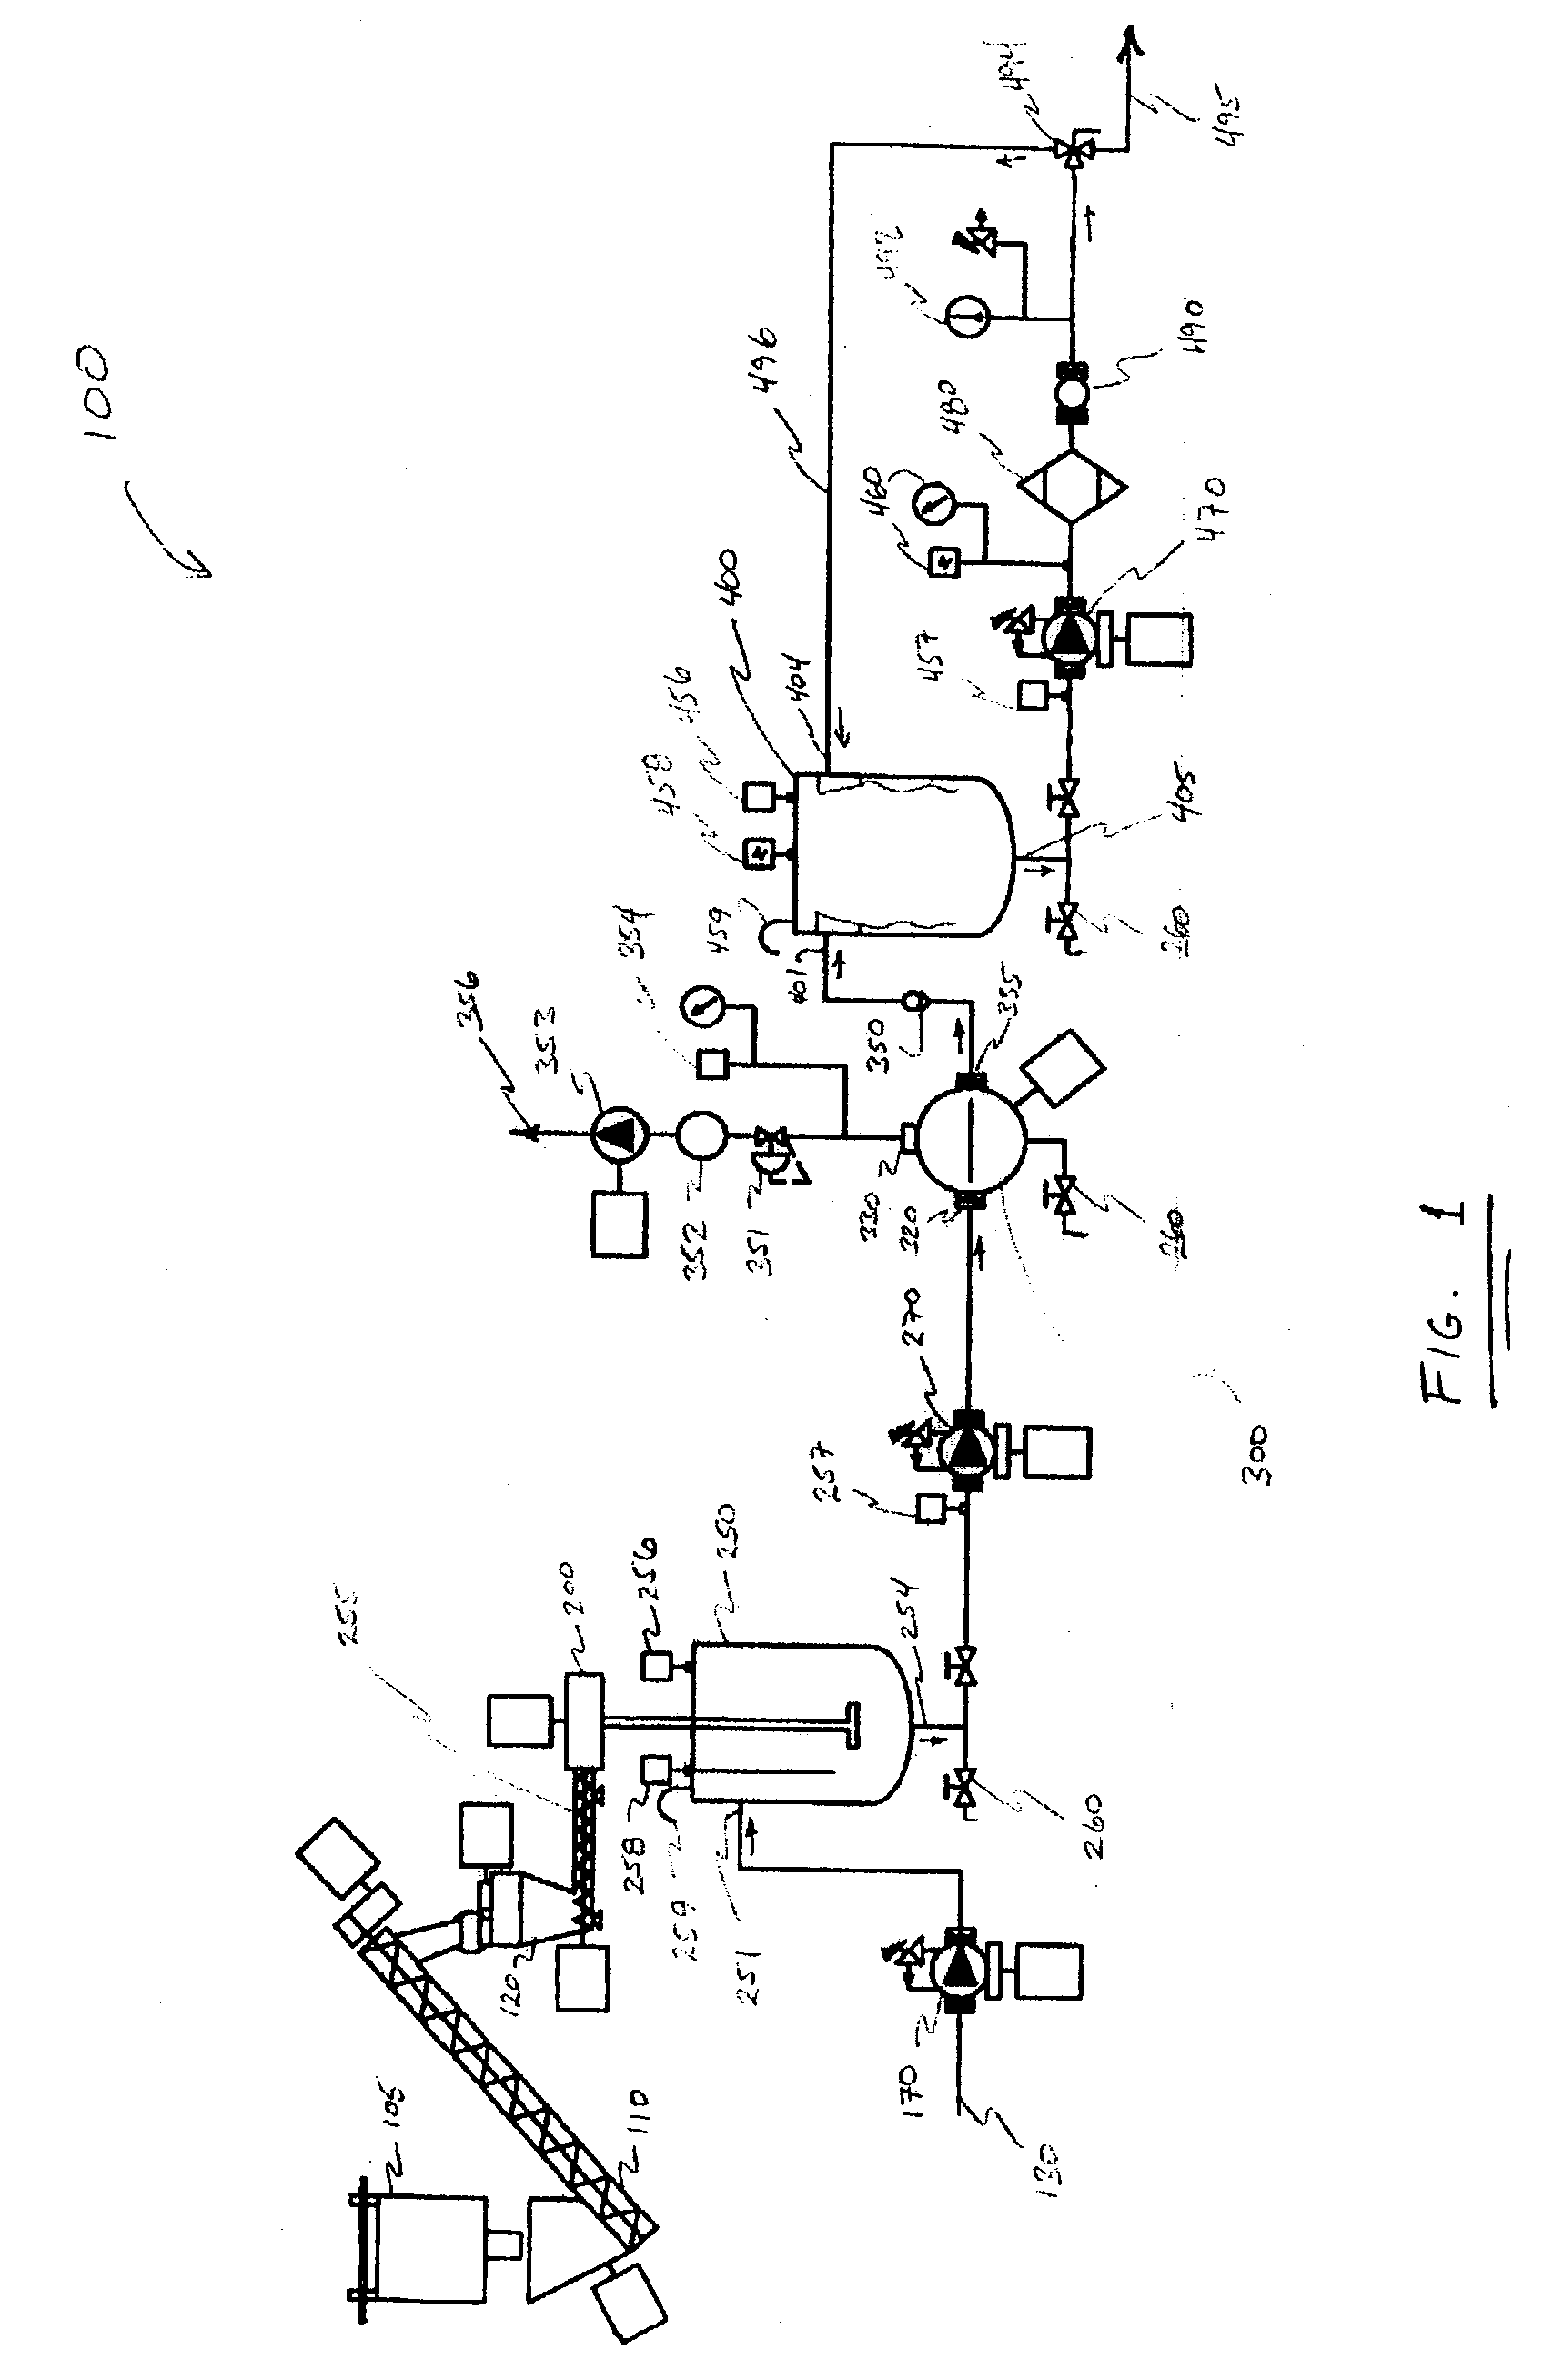 Process and apparatus for continuous mixing of slurry with removal of entrained bubbles